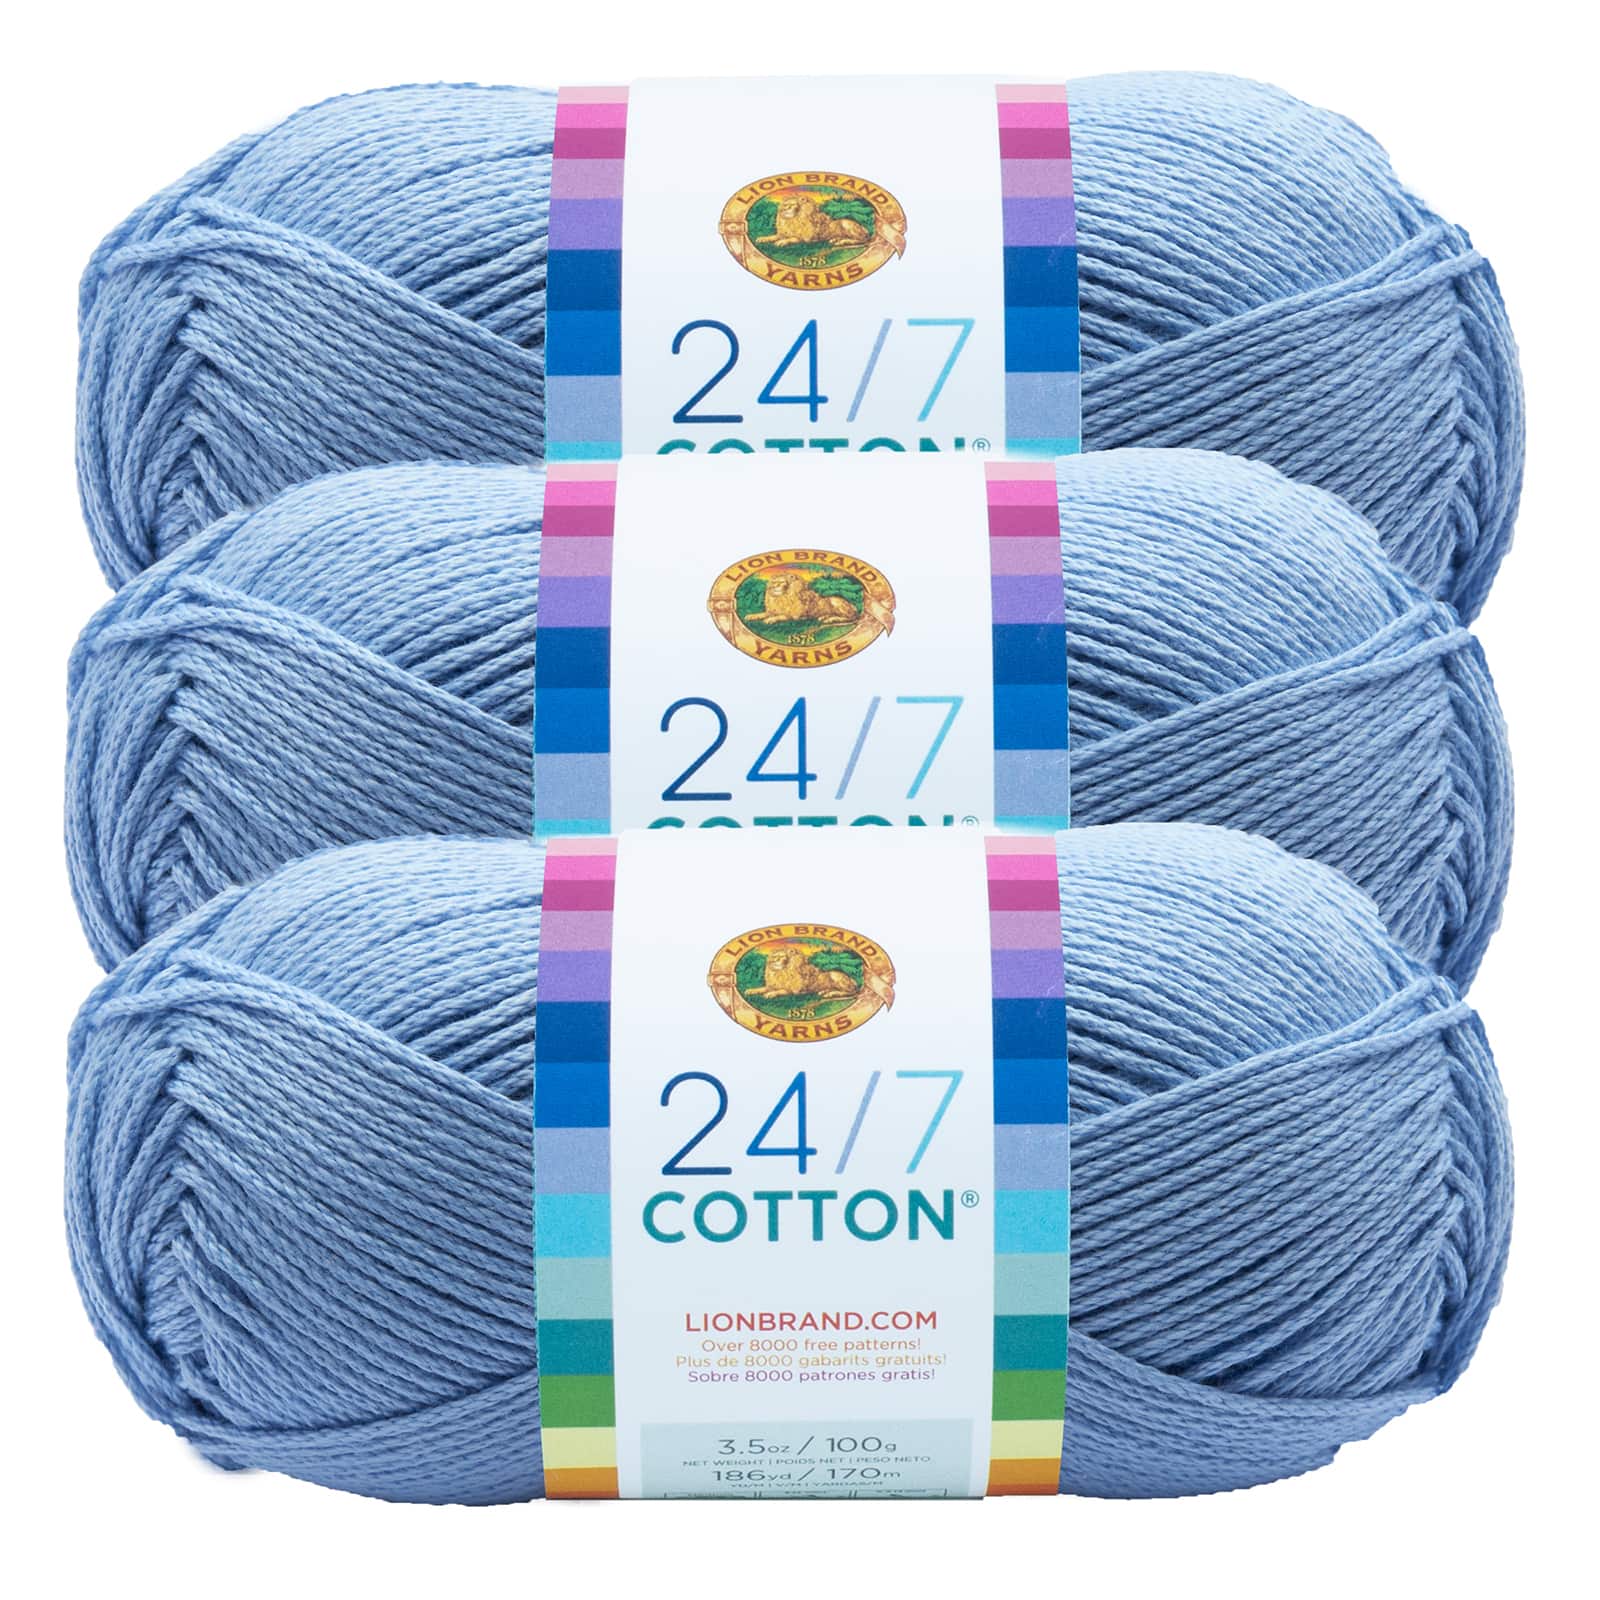 Lion brand 24/7 Cotton is pretty nice to work with. I have 1